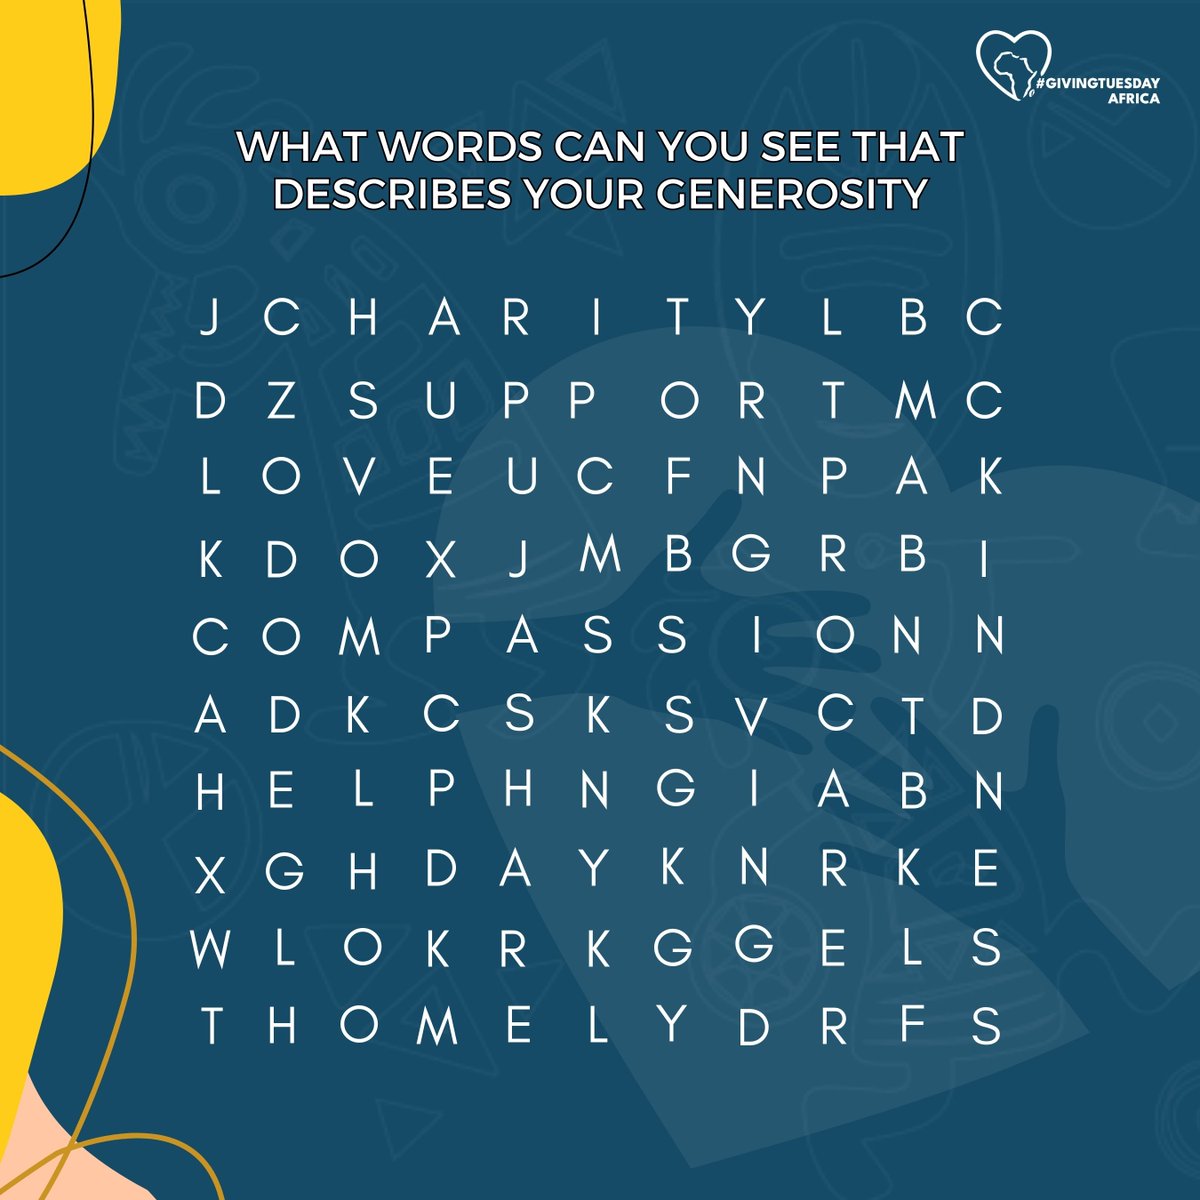 🔎 Engage your mind and explore the power of generosity with our word search puzzle! 🌟

Can you find the words that describe your generosity in this challenging puzzle? 🧩💭

#GivingTuesday #GivingTuesdayAfrica #UbuntuGiving
#AfricanPhilanthropy #CommunityEmpowerment